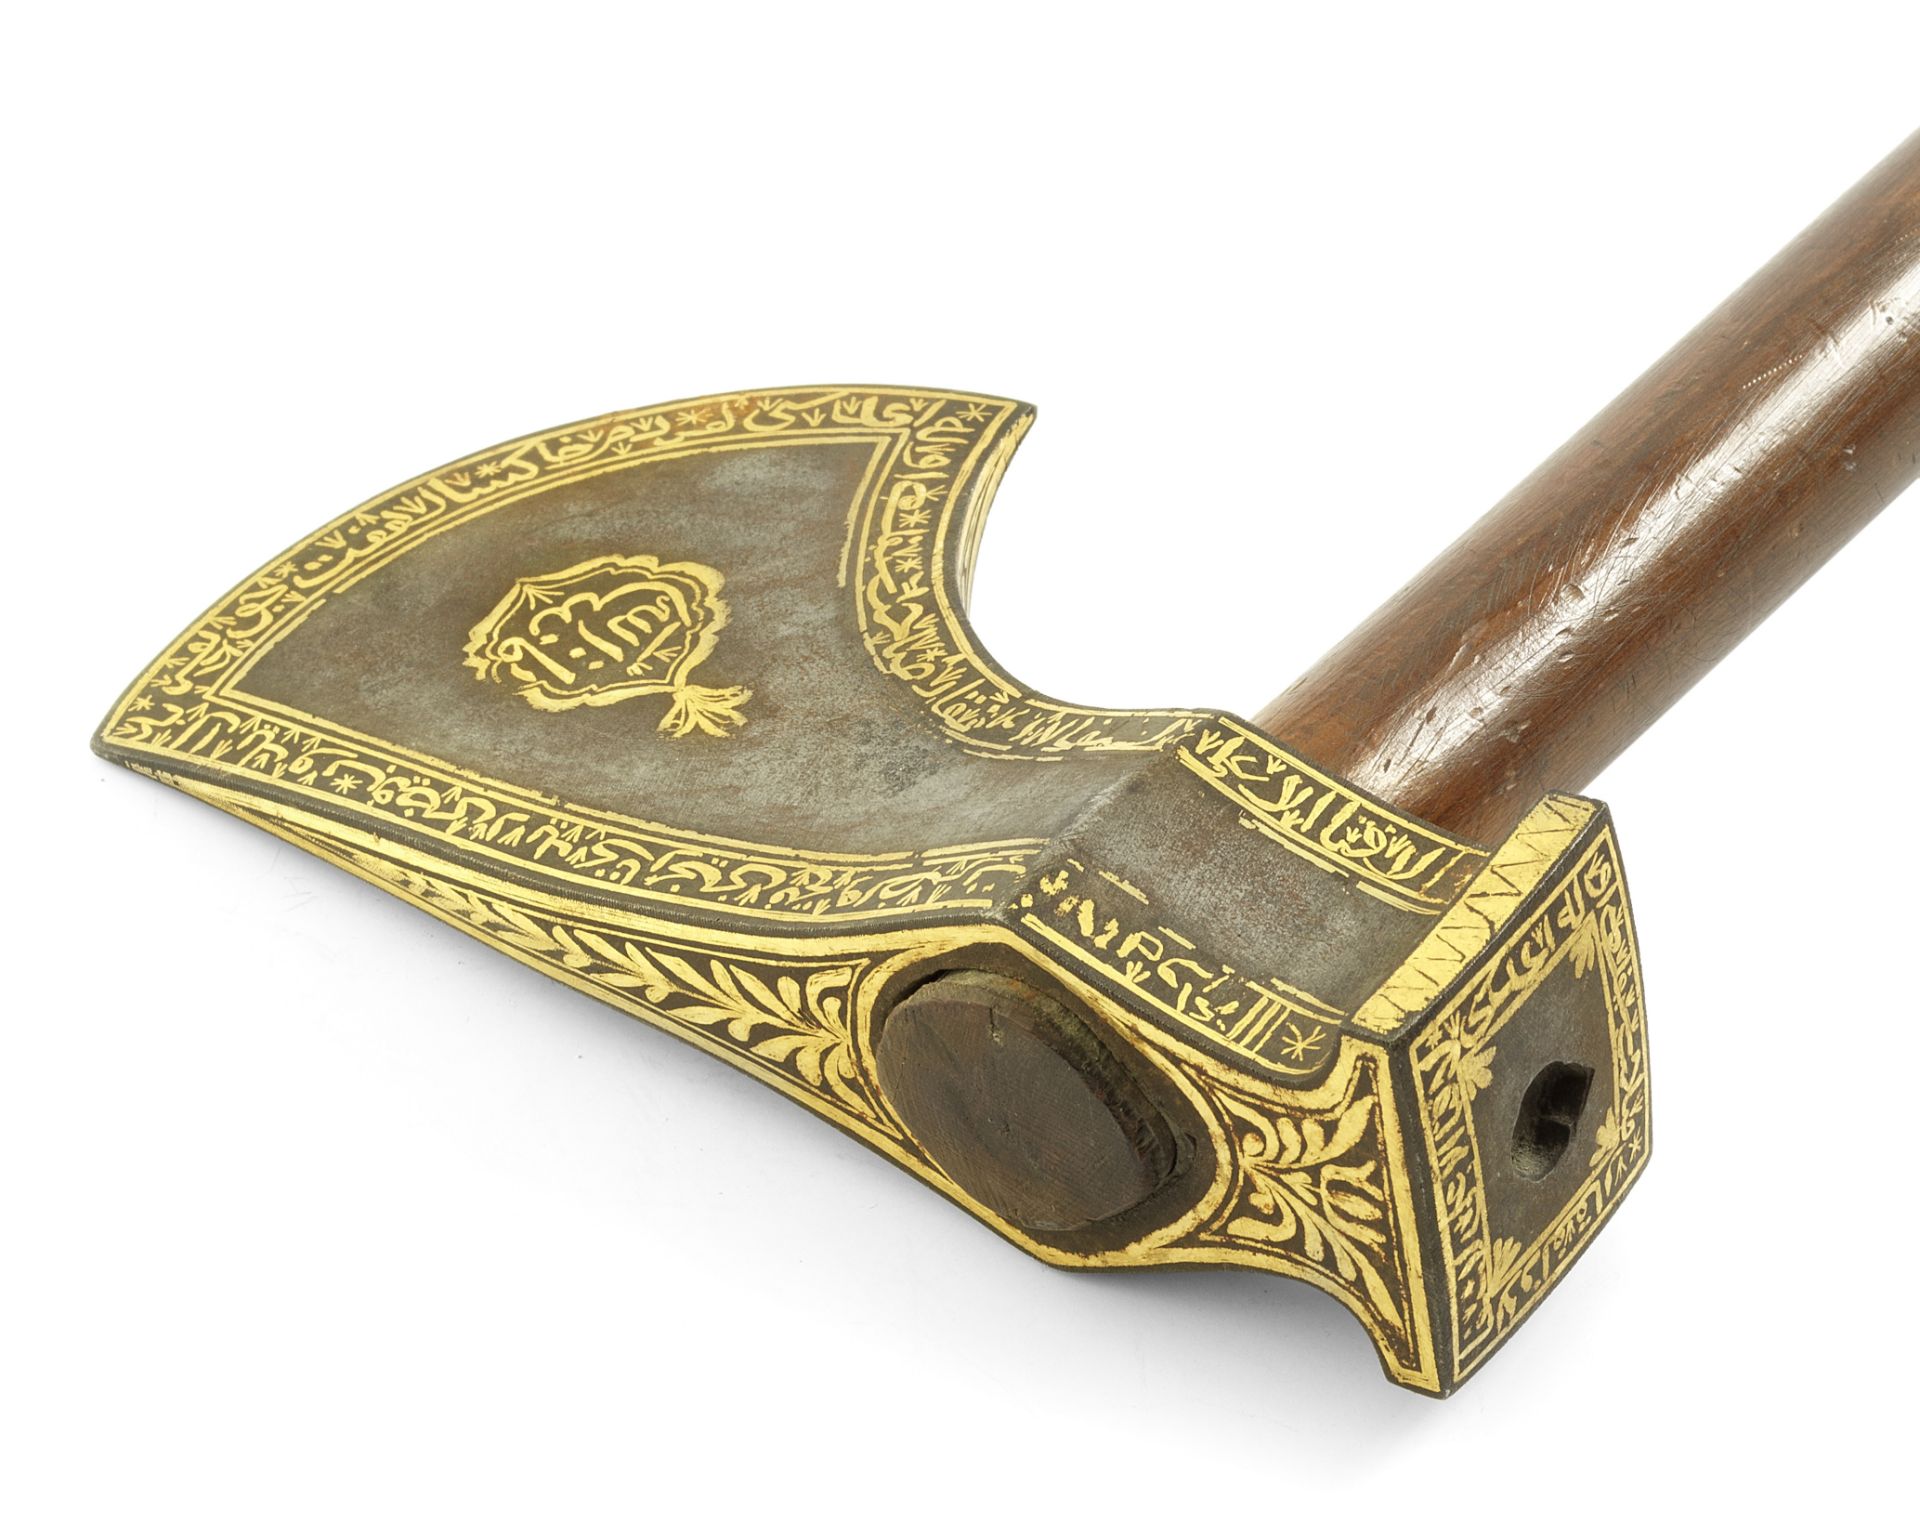 An Ottoman gold-damascened steel axe-head signed by Feyzi Turkey, early 19th Century, possibly da...